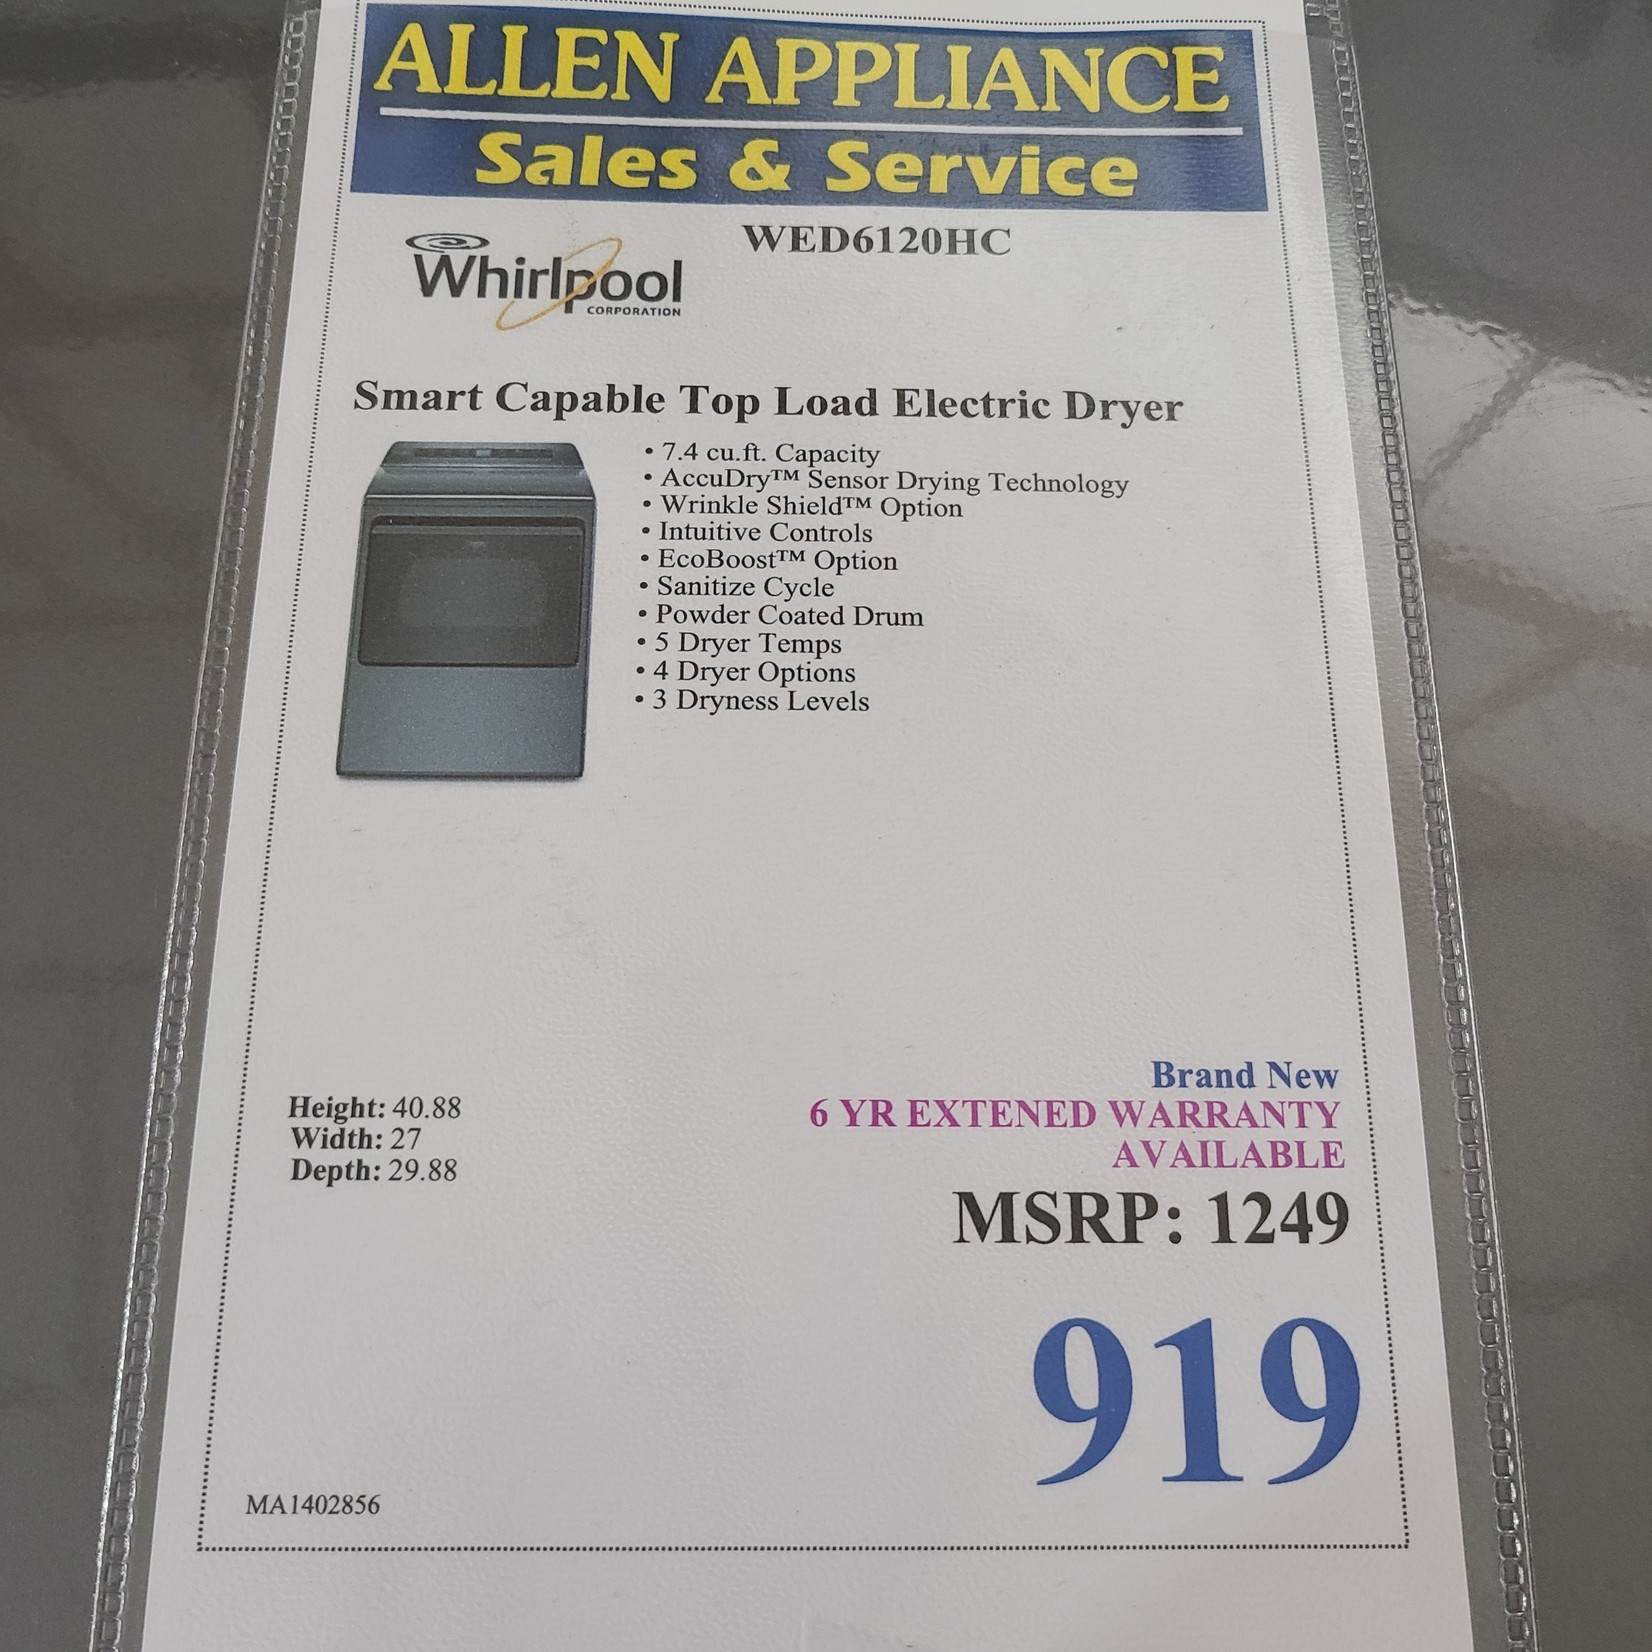 Whirlpool Whirlpool  Smart Capable Top Load Electric Dryer WED6120HC - MA1402856